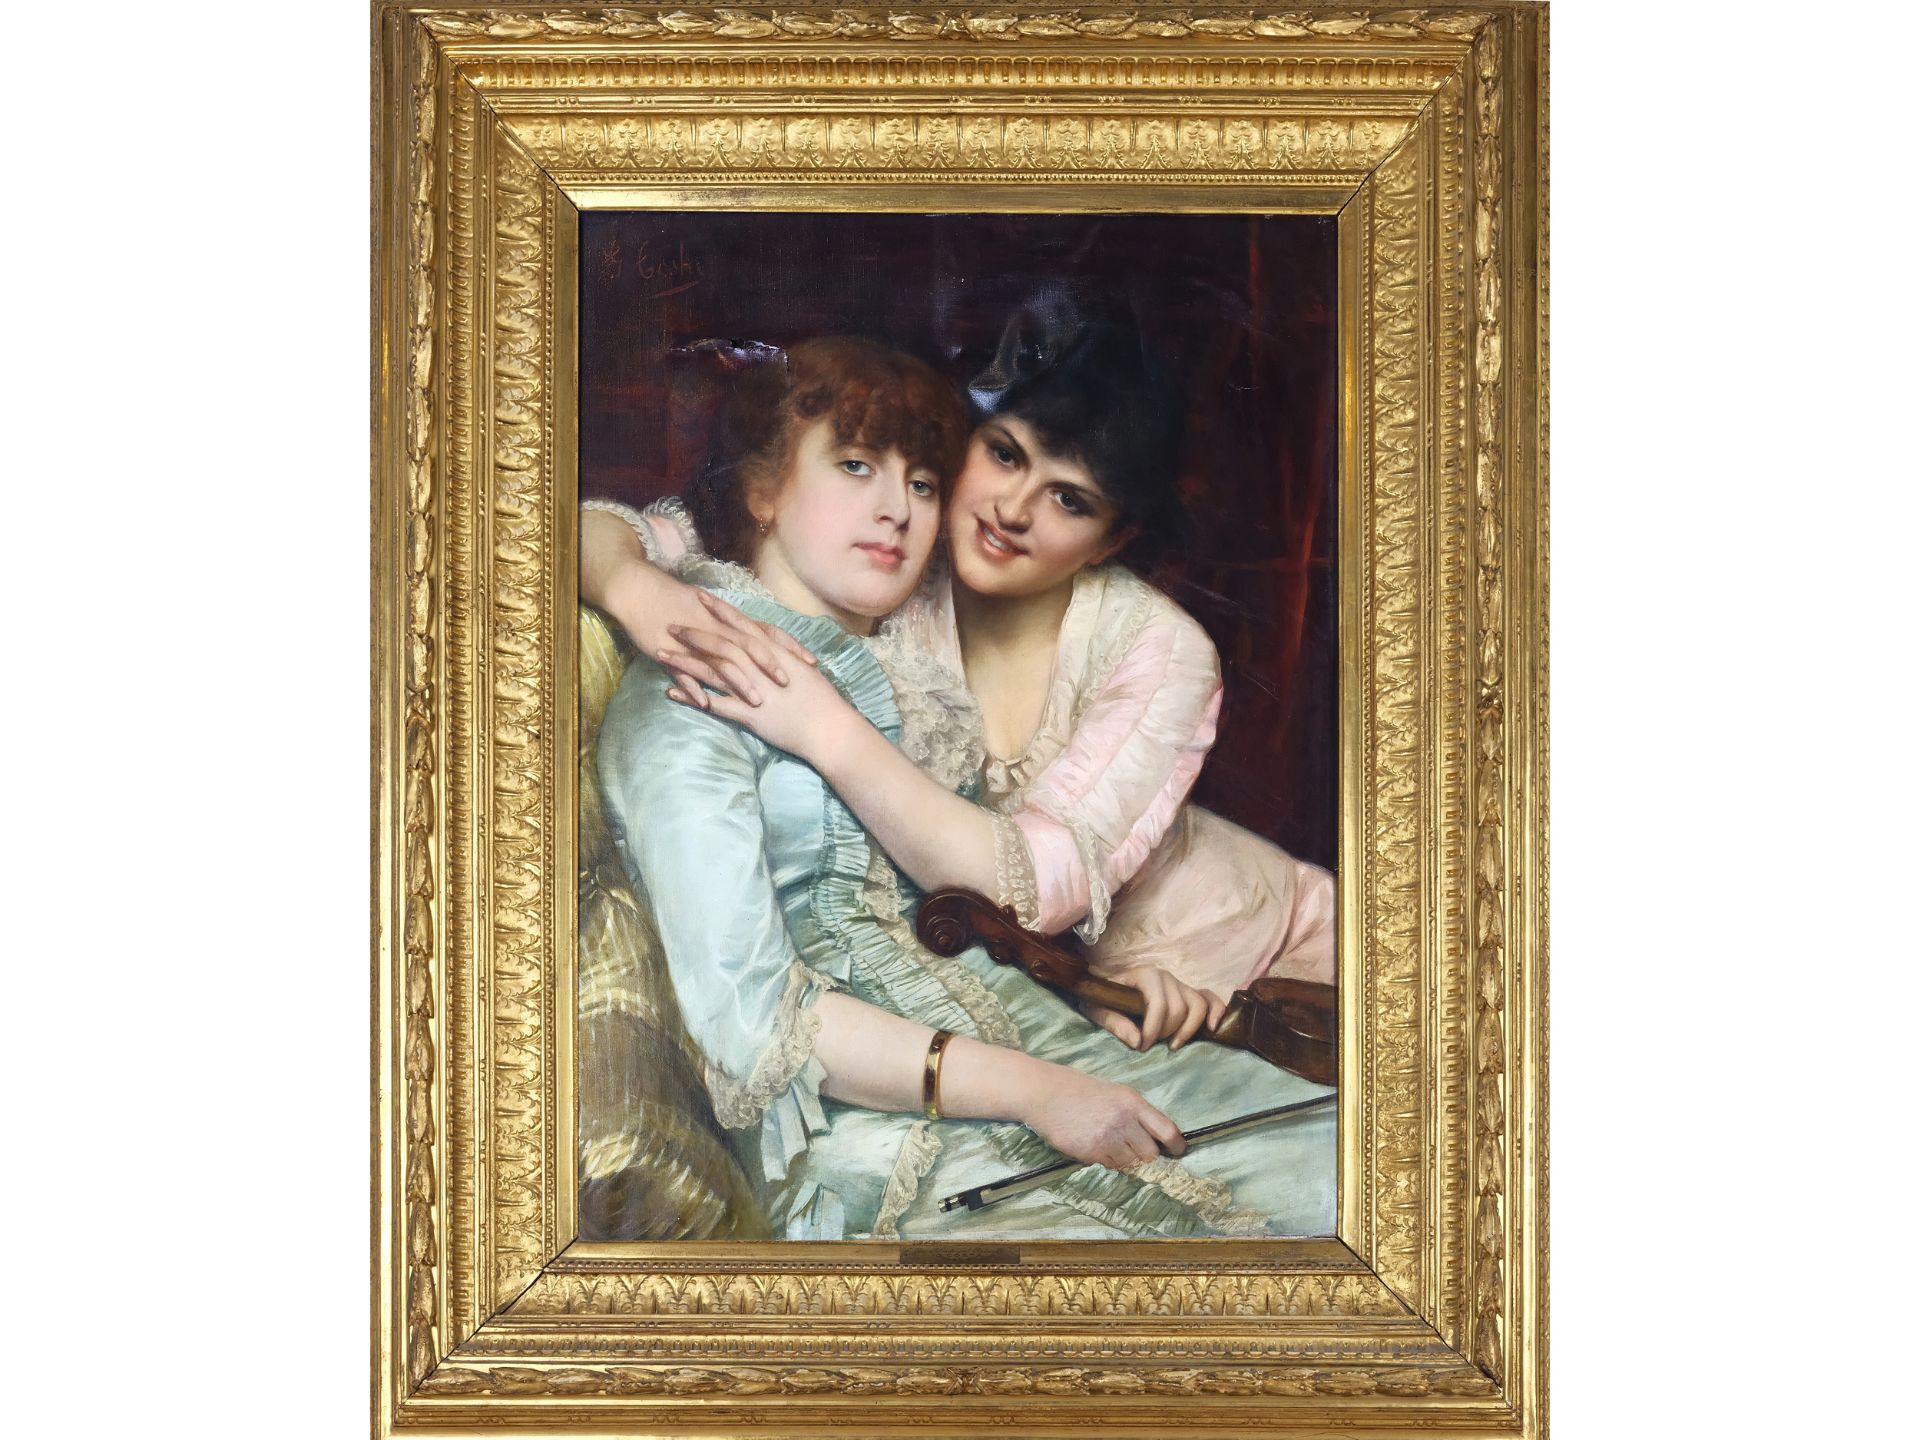 Giovanni Costa, Italy, 1826 - 1903, The Blonde and the Brunette - Image 2 of 5